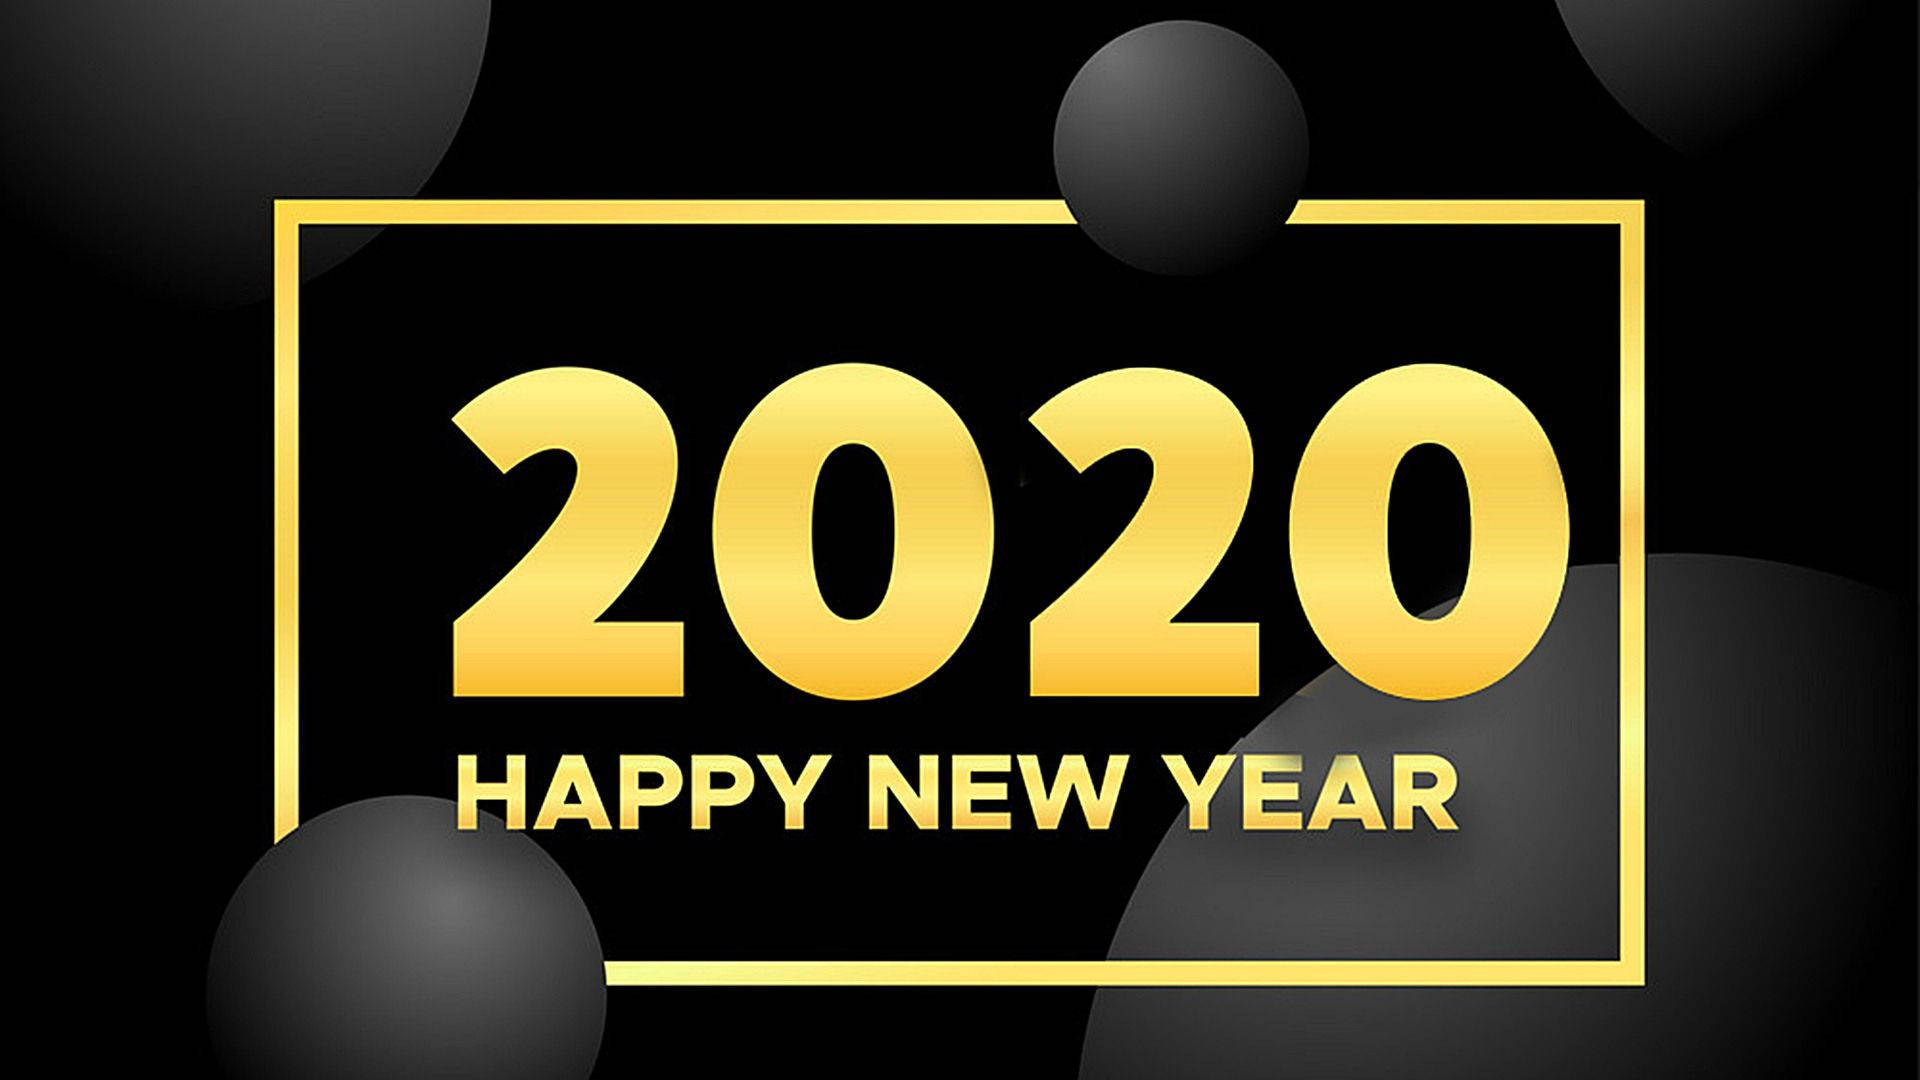 1920x1080 Happy New Year 2020 Background HD Wallpaper 45540